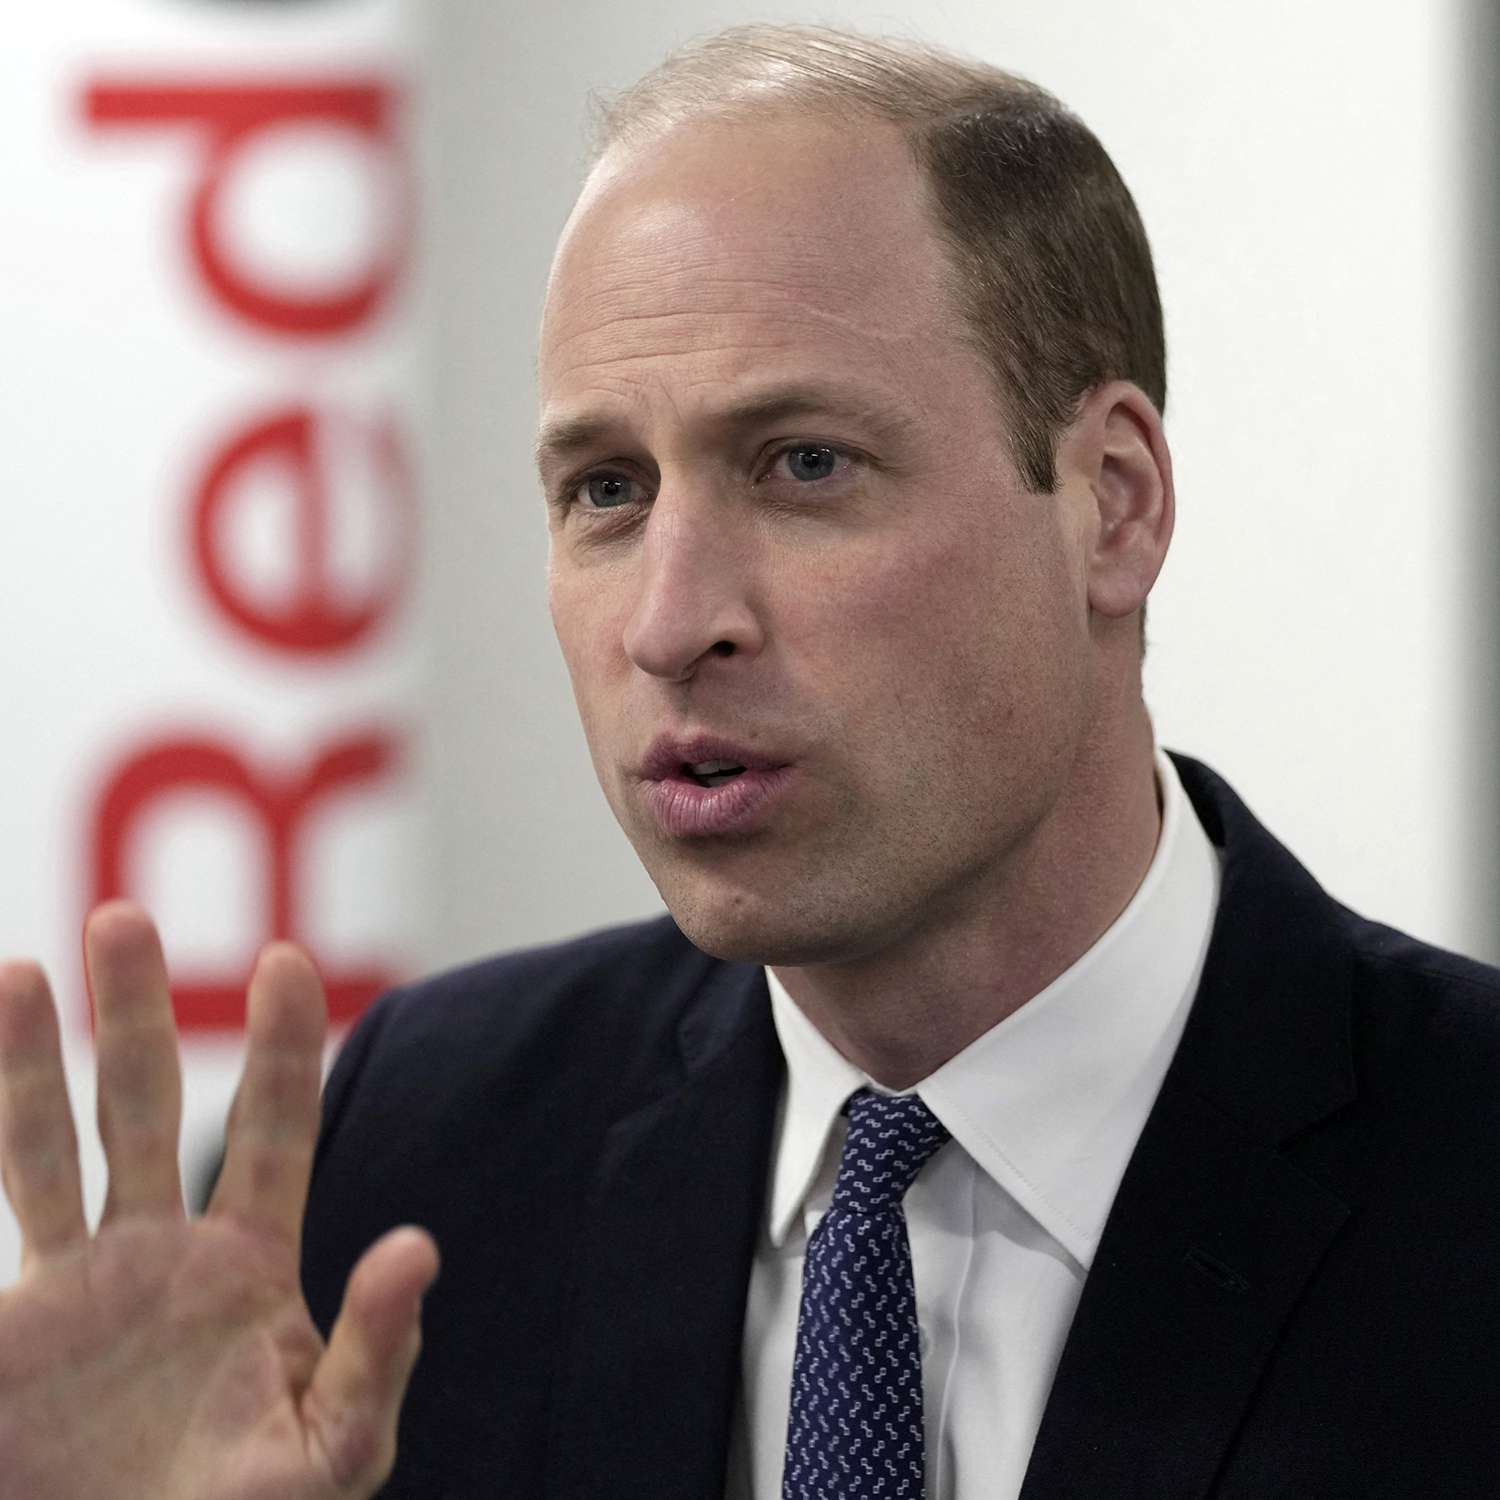 Prince William prince of wales red cross london 02 20 24